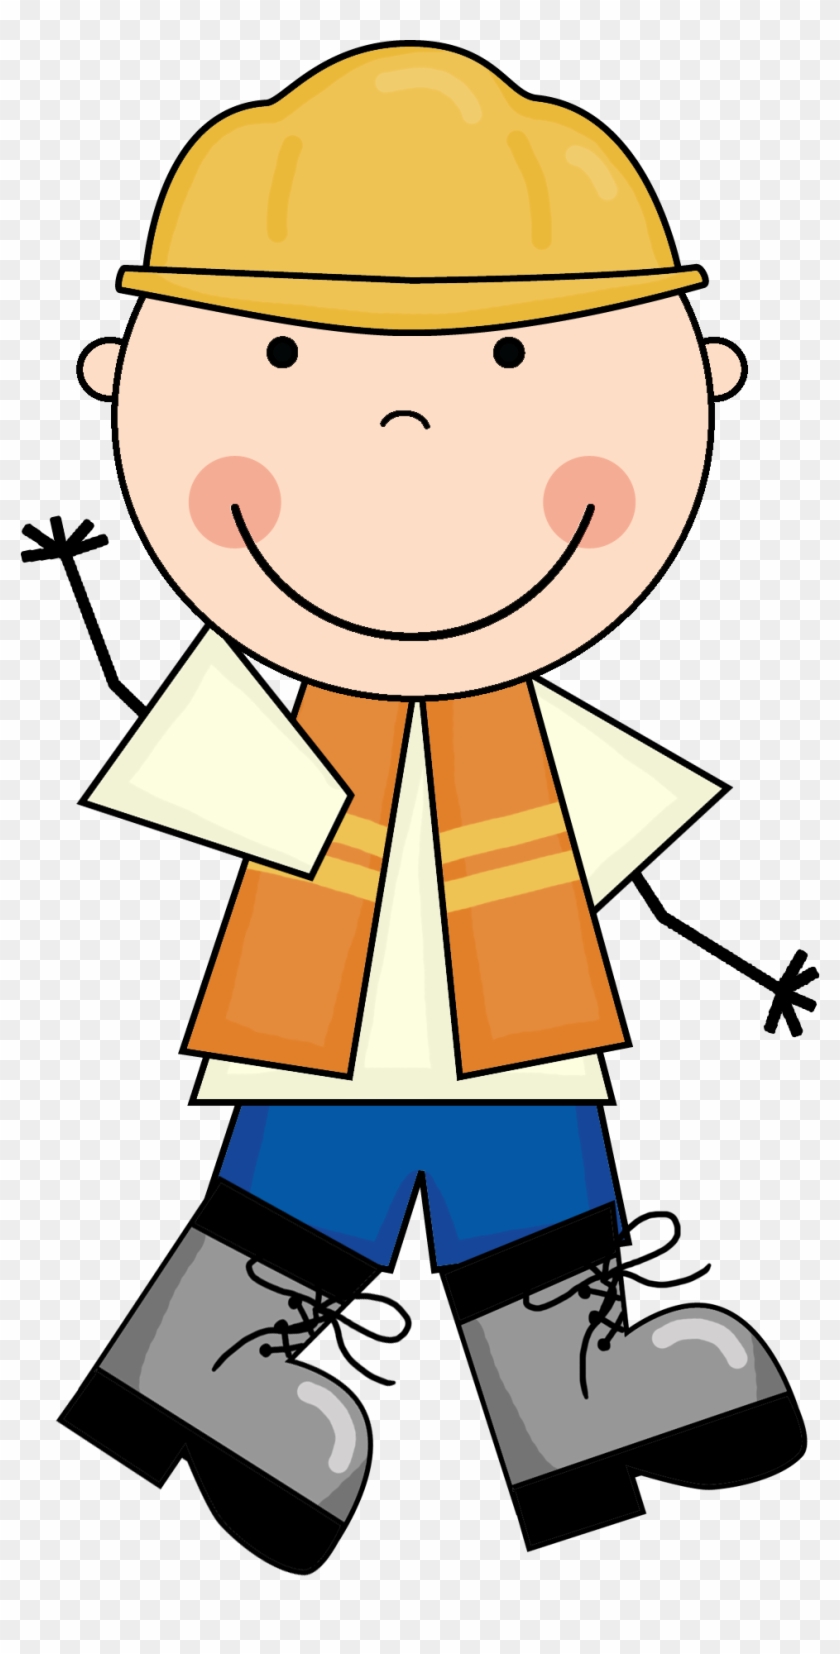 Construction Kid1 - Construction Kid Png #1738465